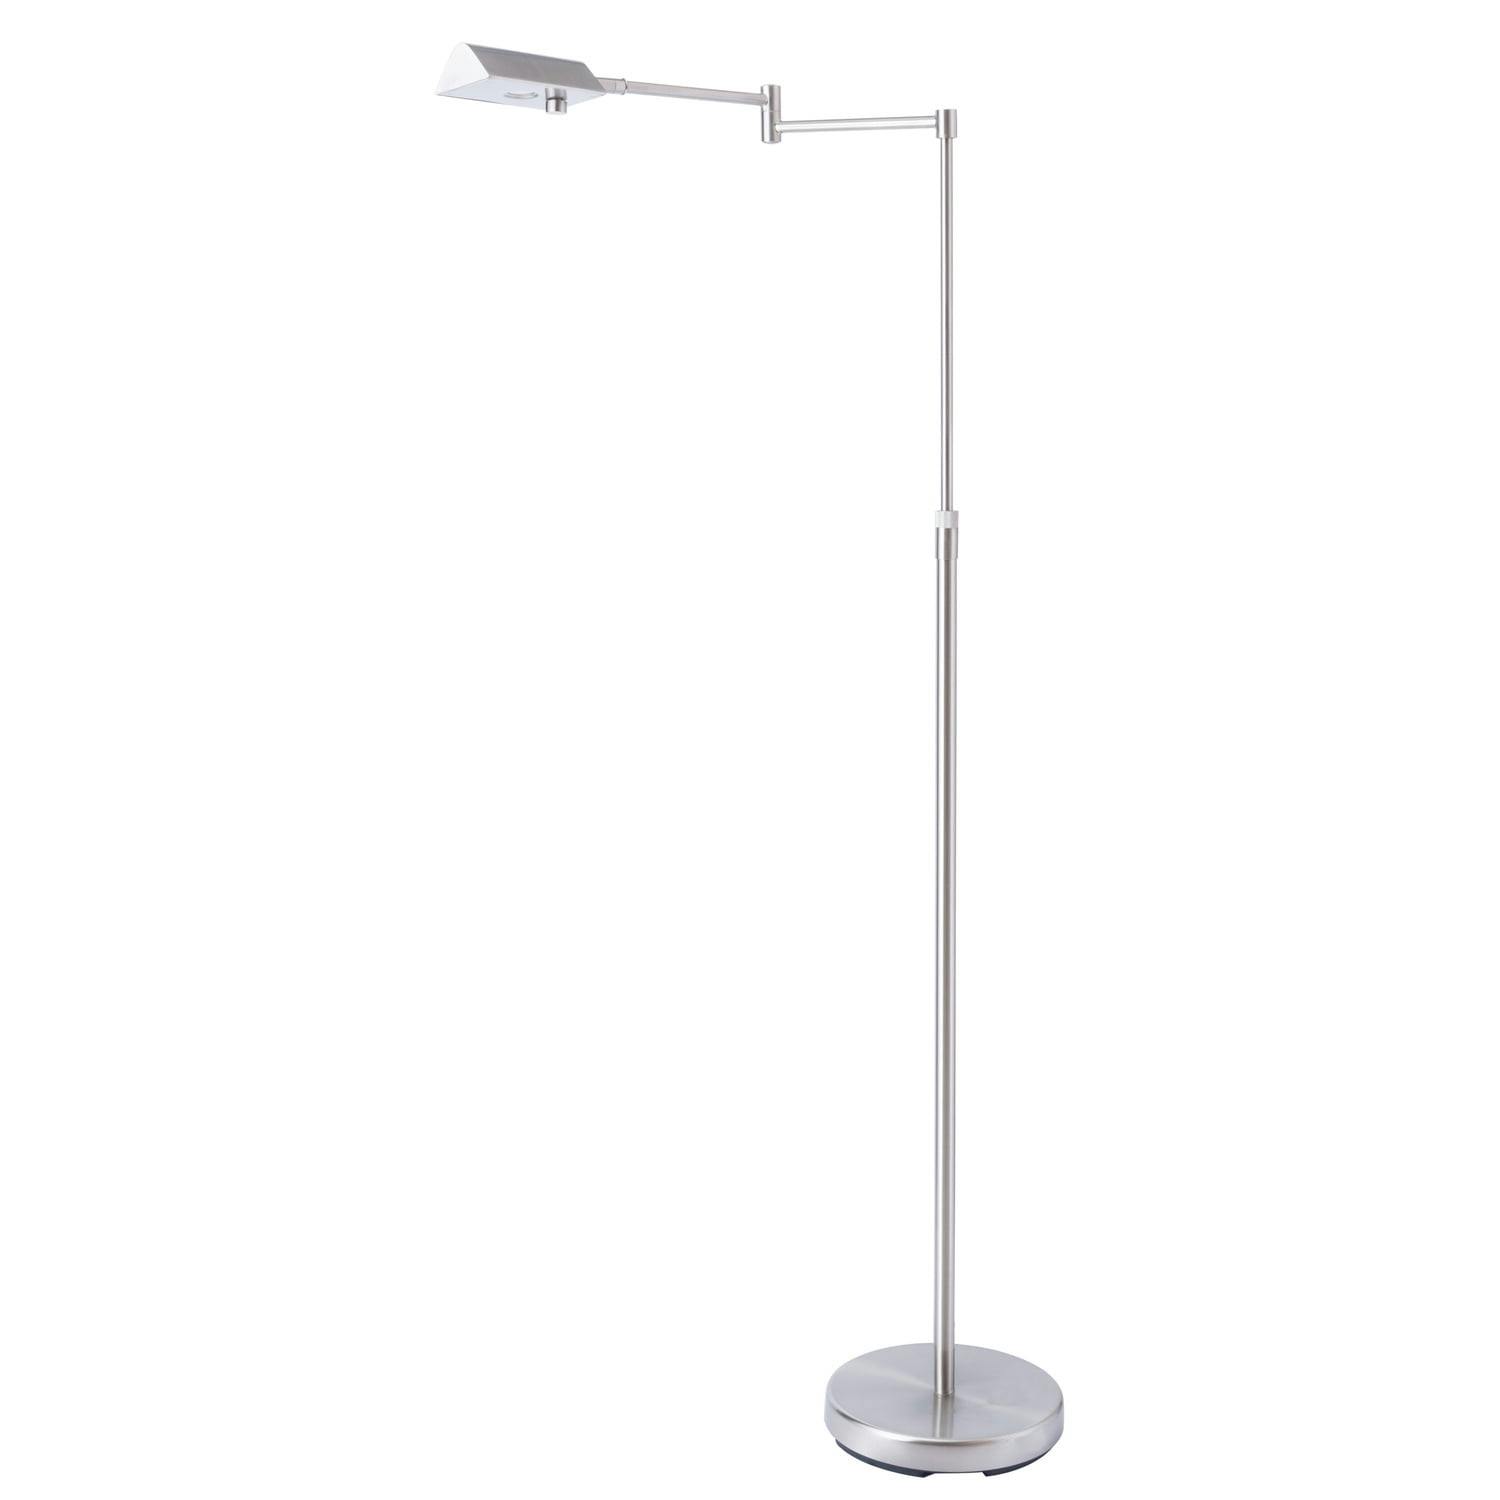 Pharma Collection 55" Adjustable LED Floor Lamp in Brushed Nickel